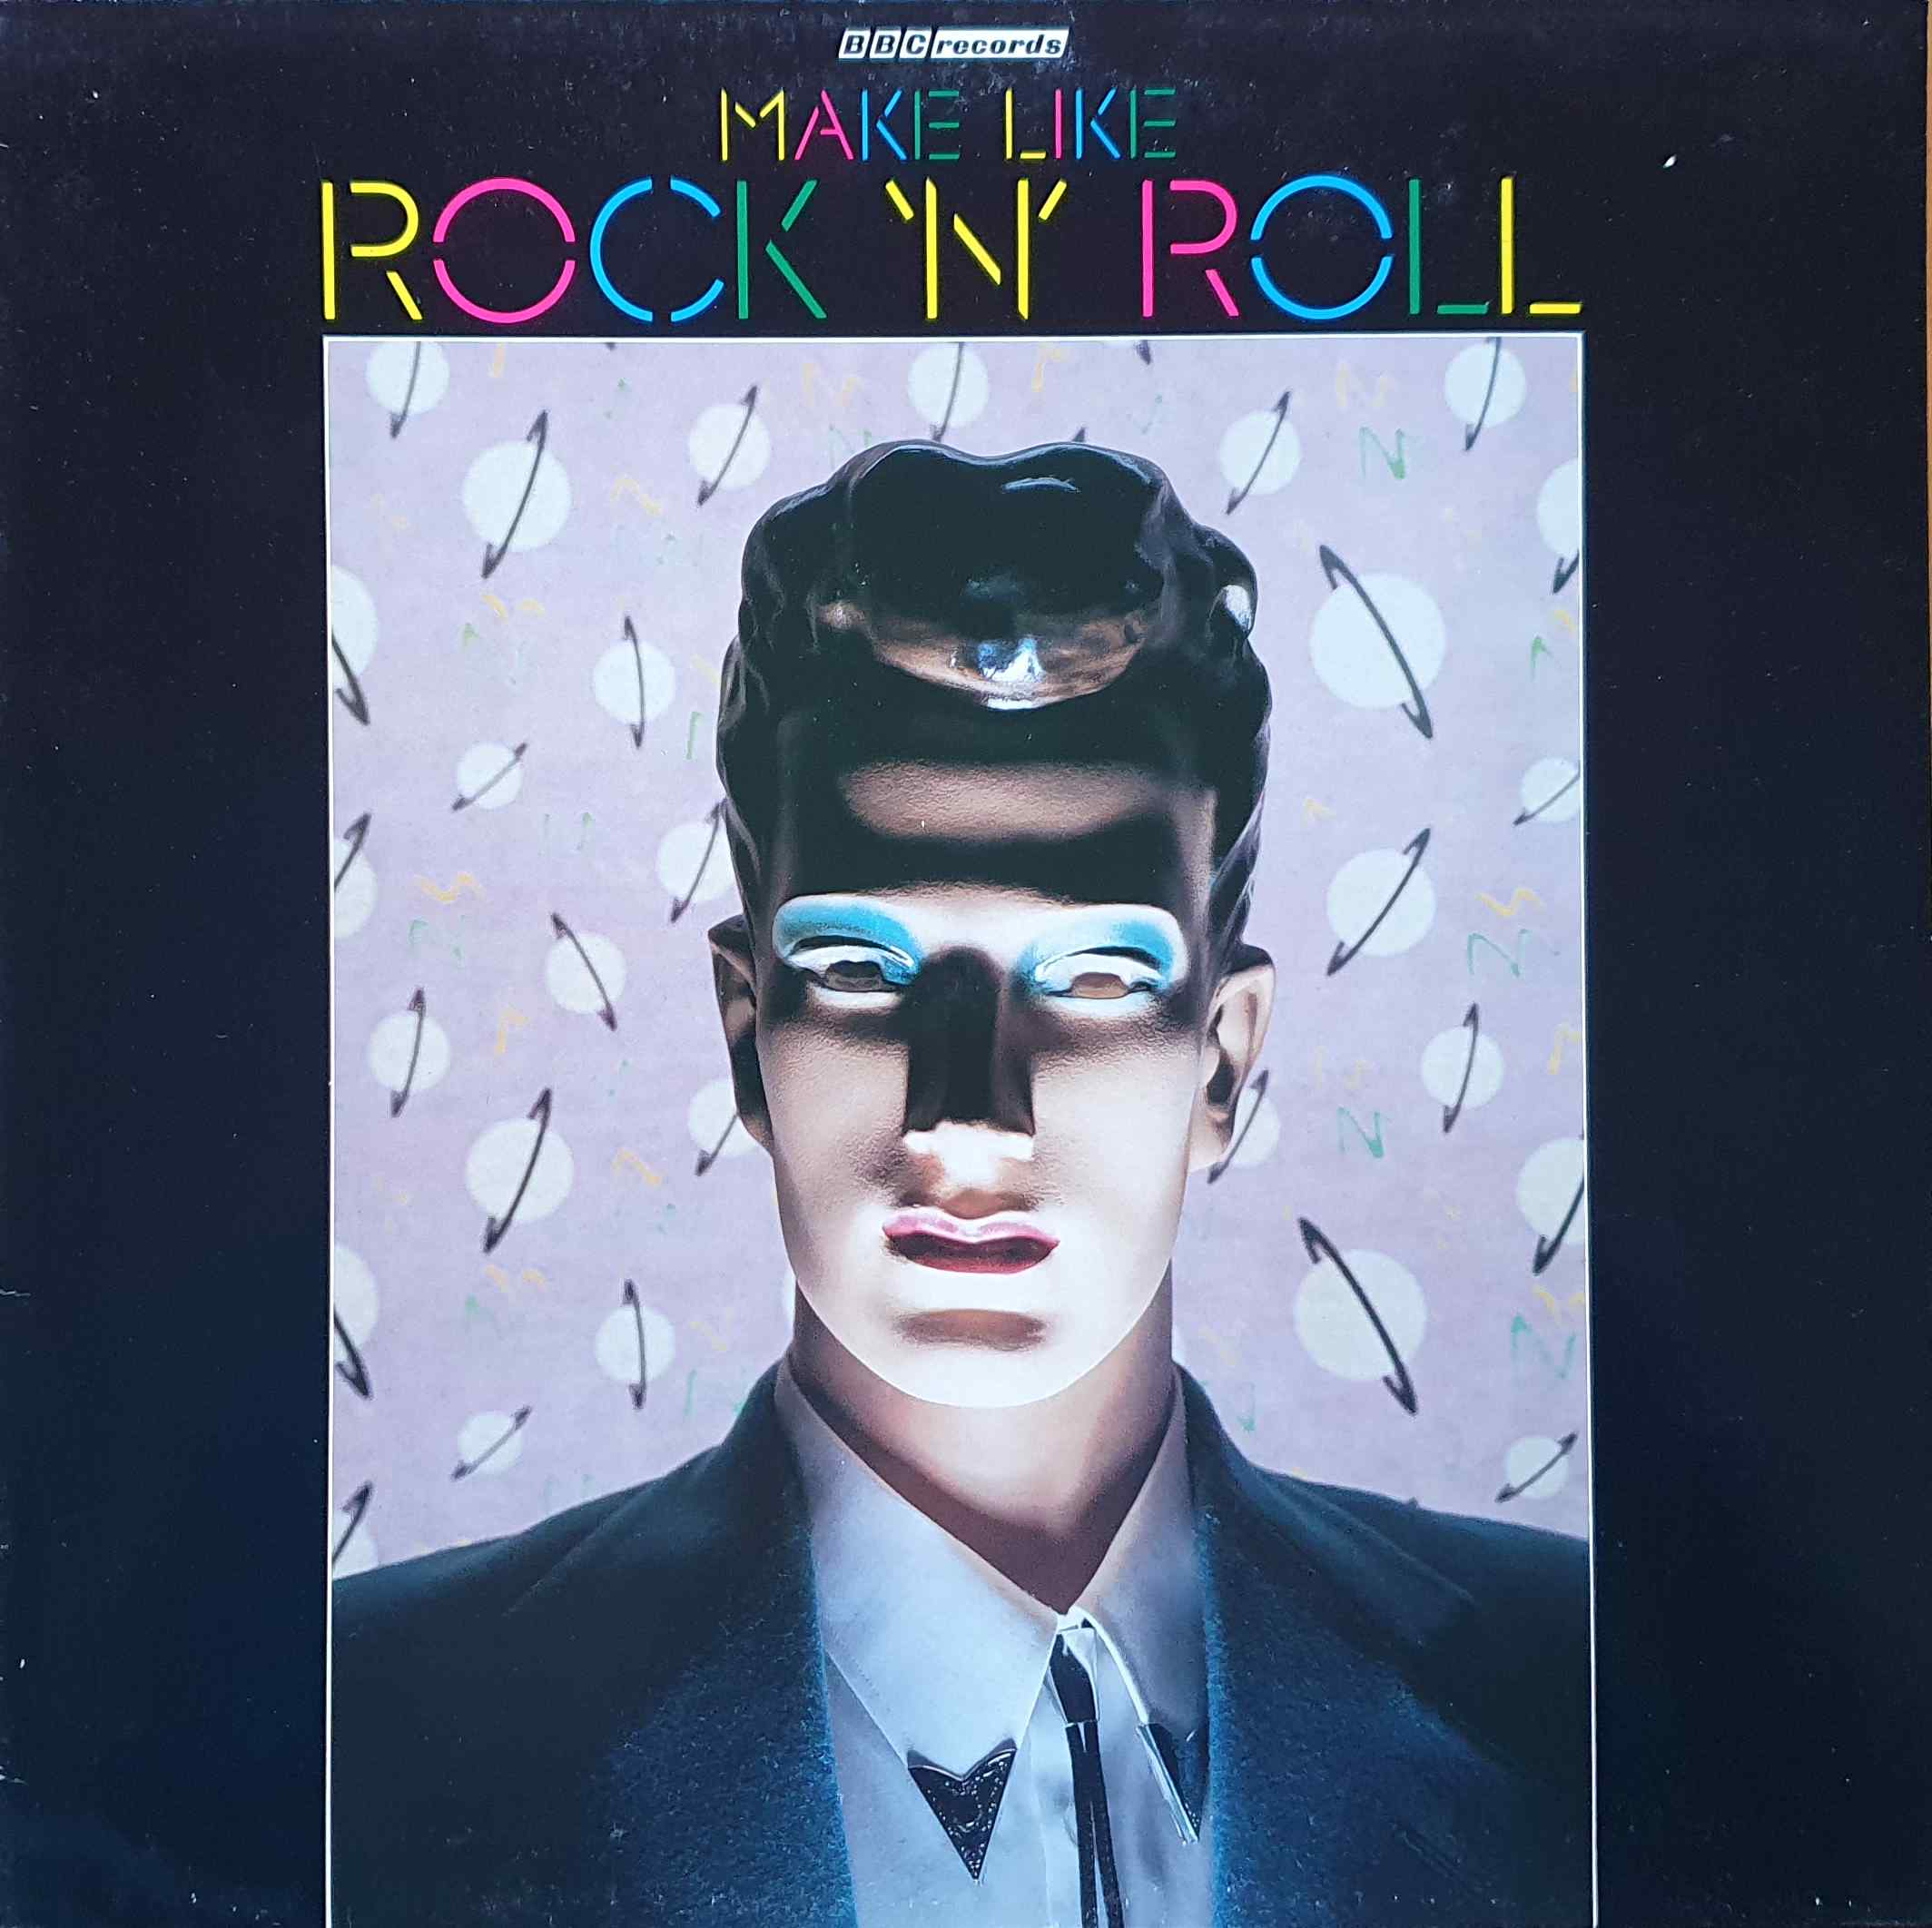 Picture of Make like rock 'n' roll by artist Various from the BBC albums - Records and Tapes library